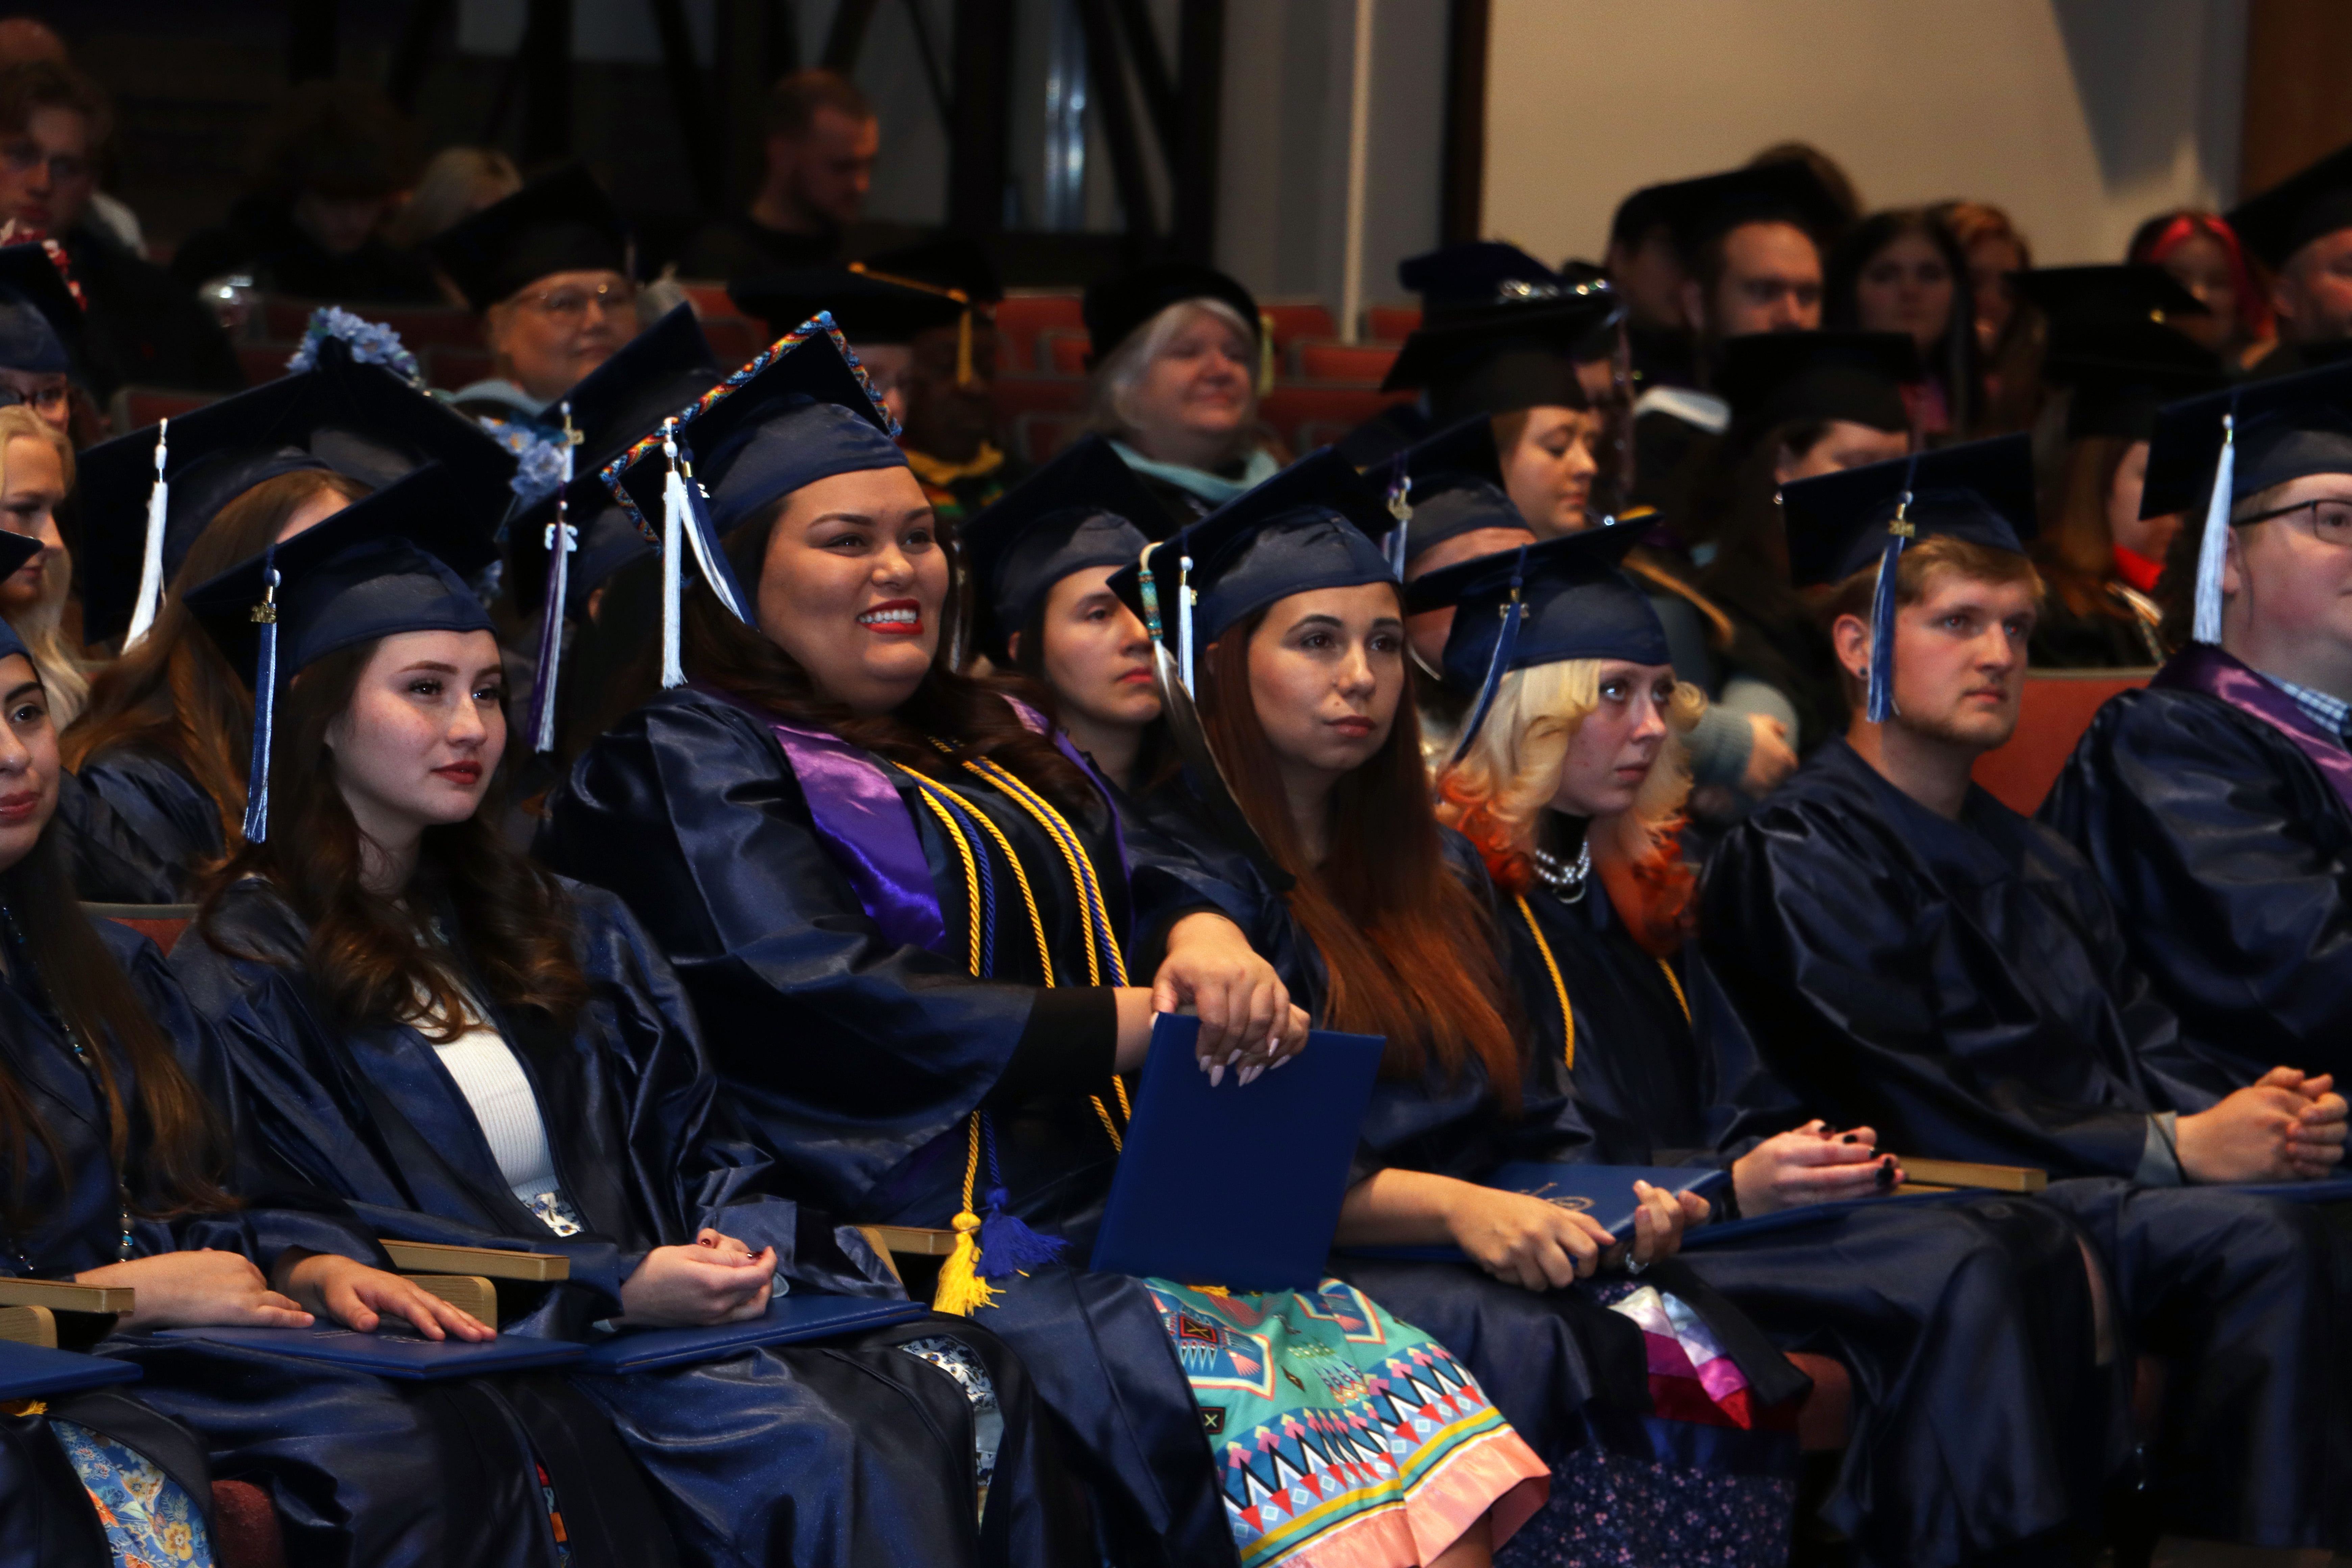 SCC graduates are pictured here during a commencement ceremony in December.